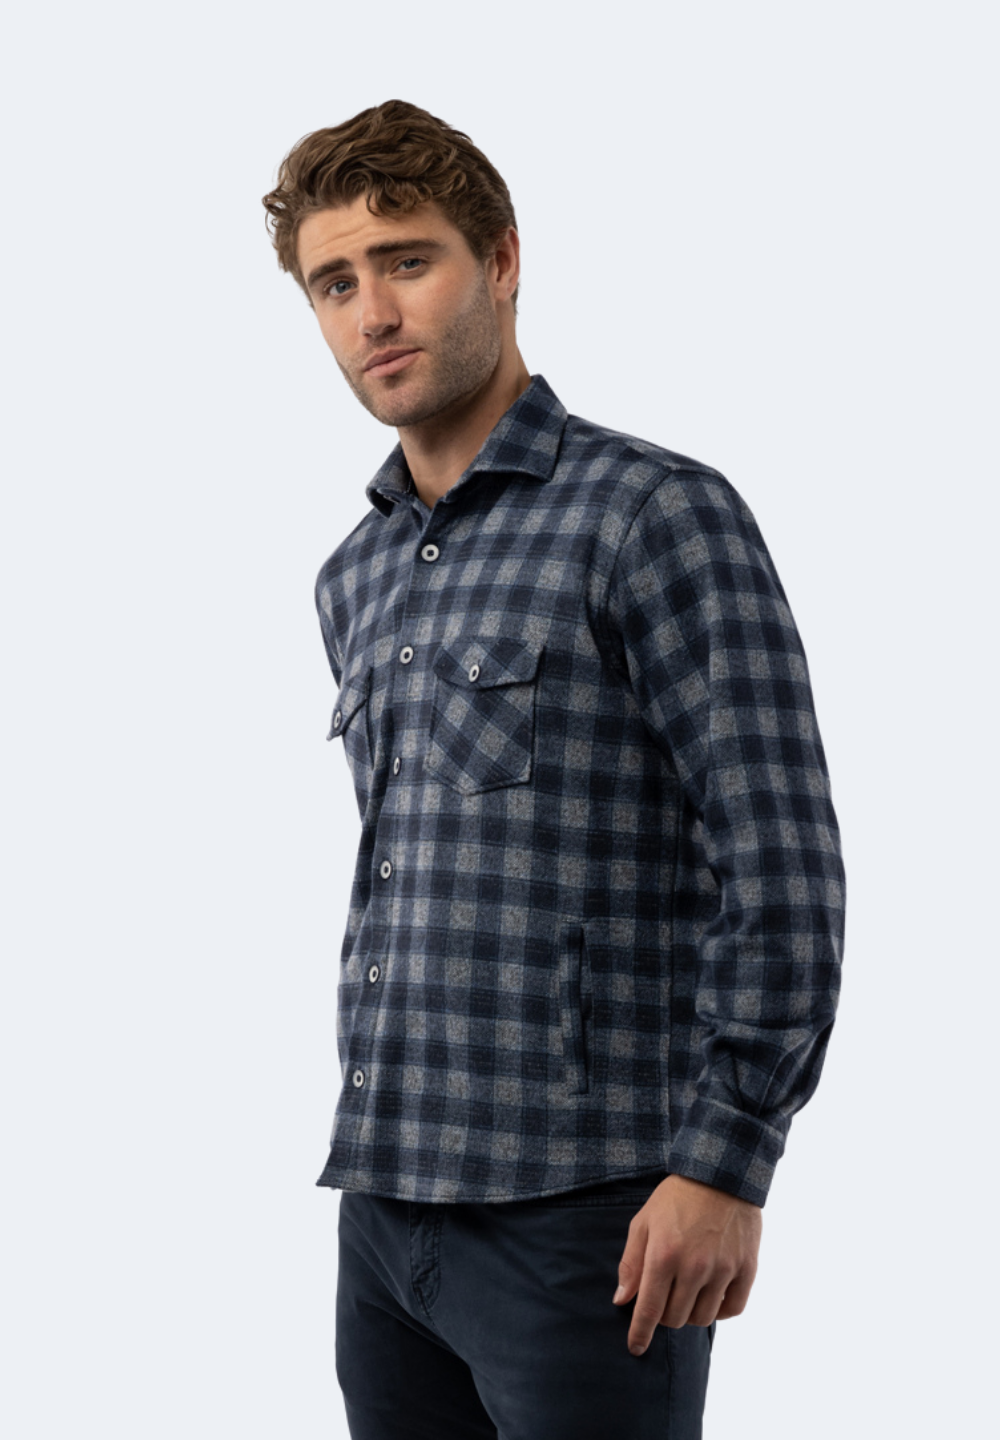 Black and Blue Plaid Flannel